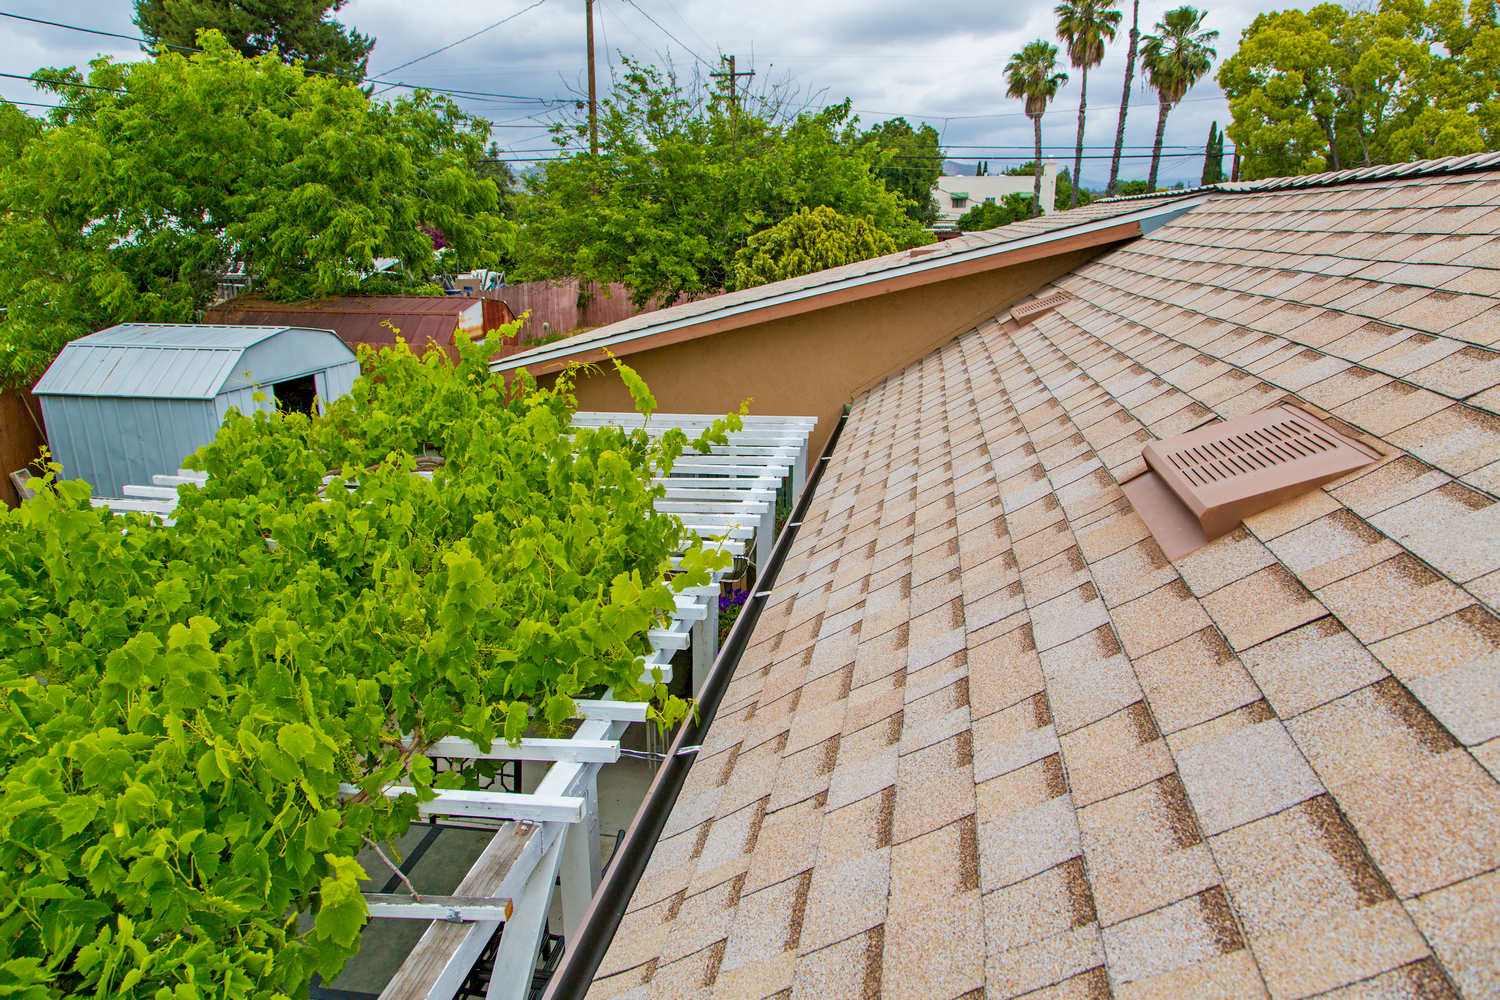 Roofing and gutter Replacement in El Cajon (6)